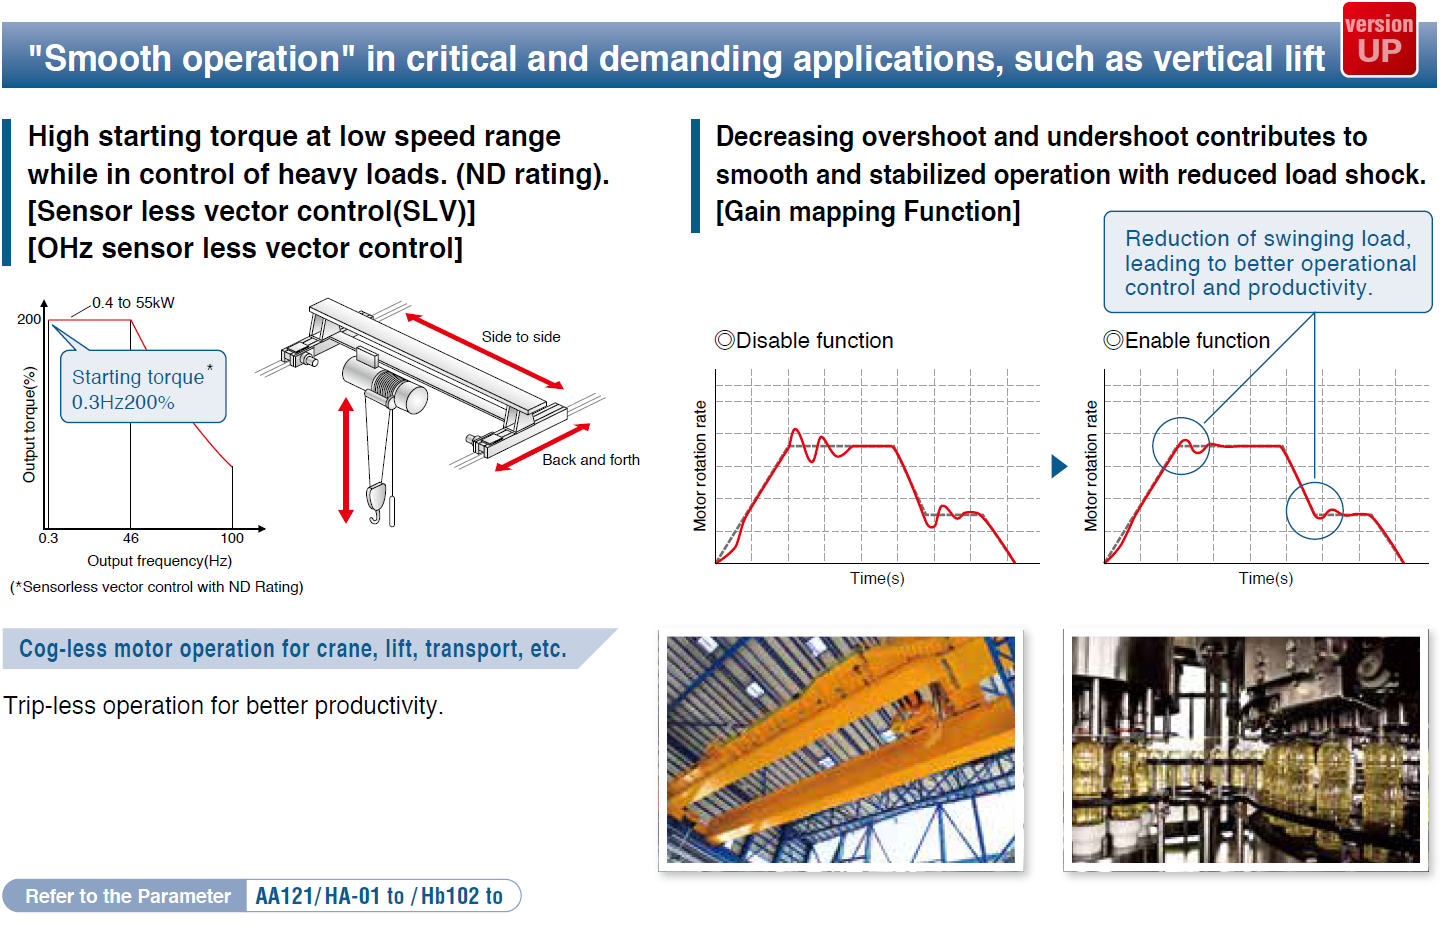 "Smooth operation" in critical and demanding applications, such as vertical lift